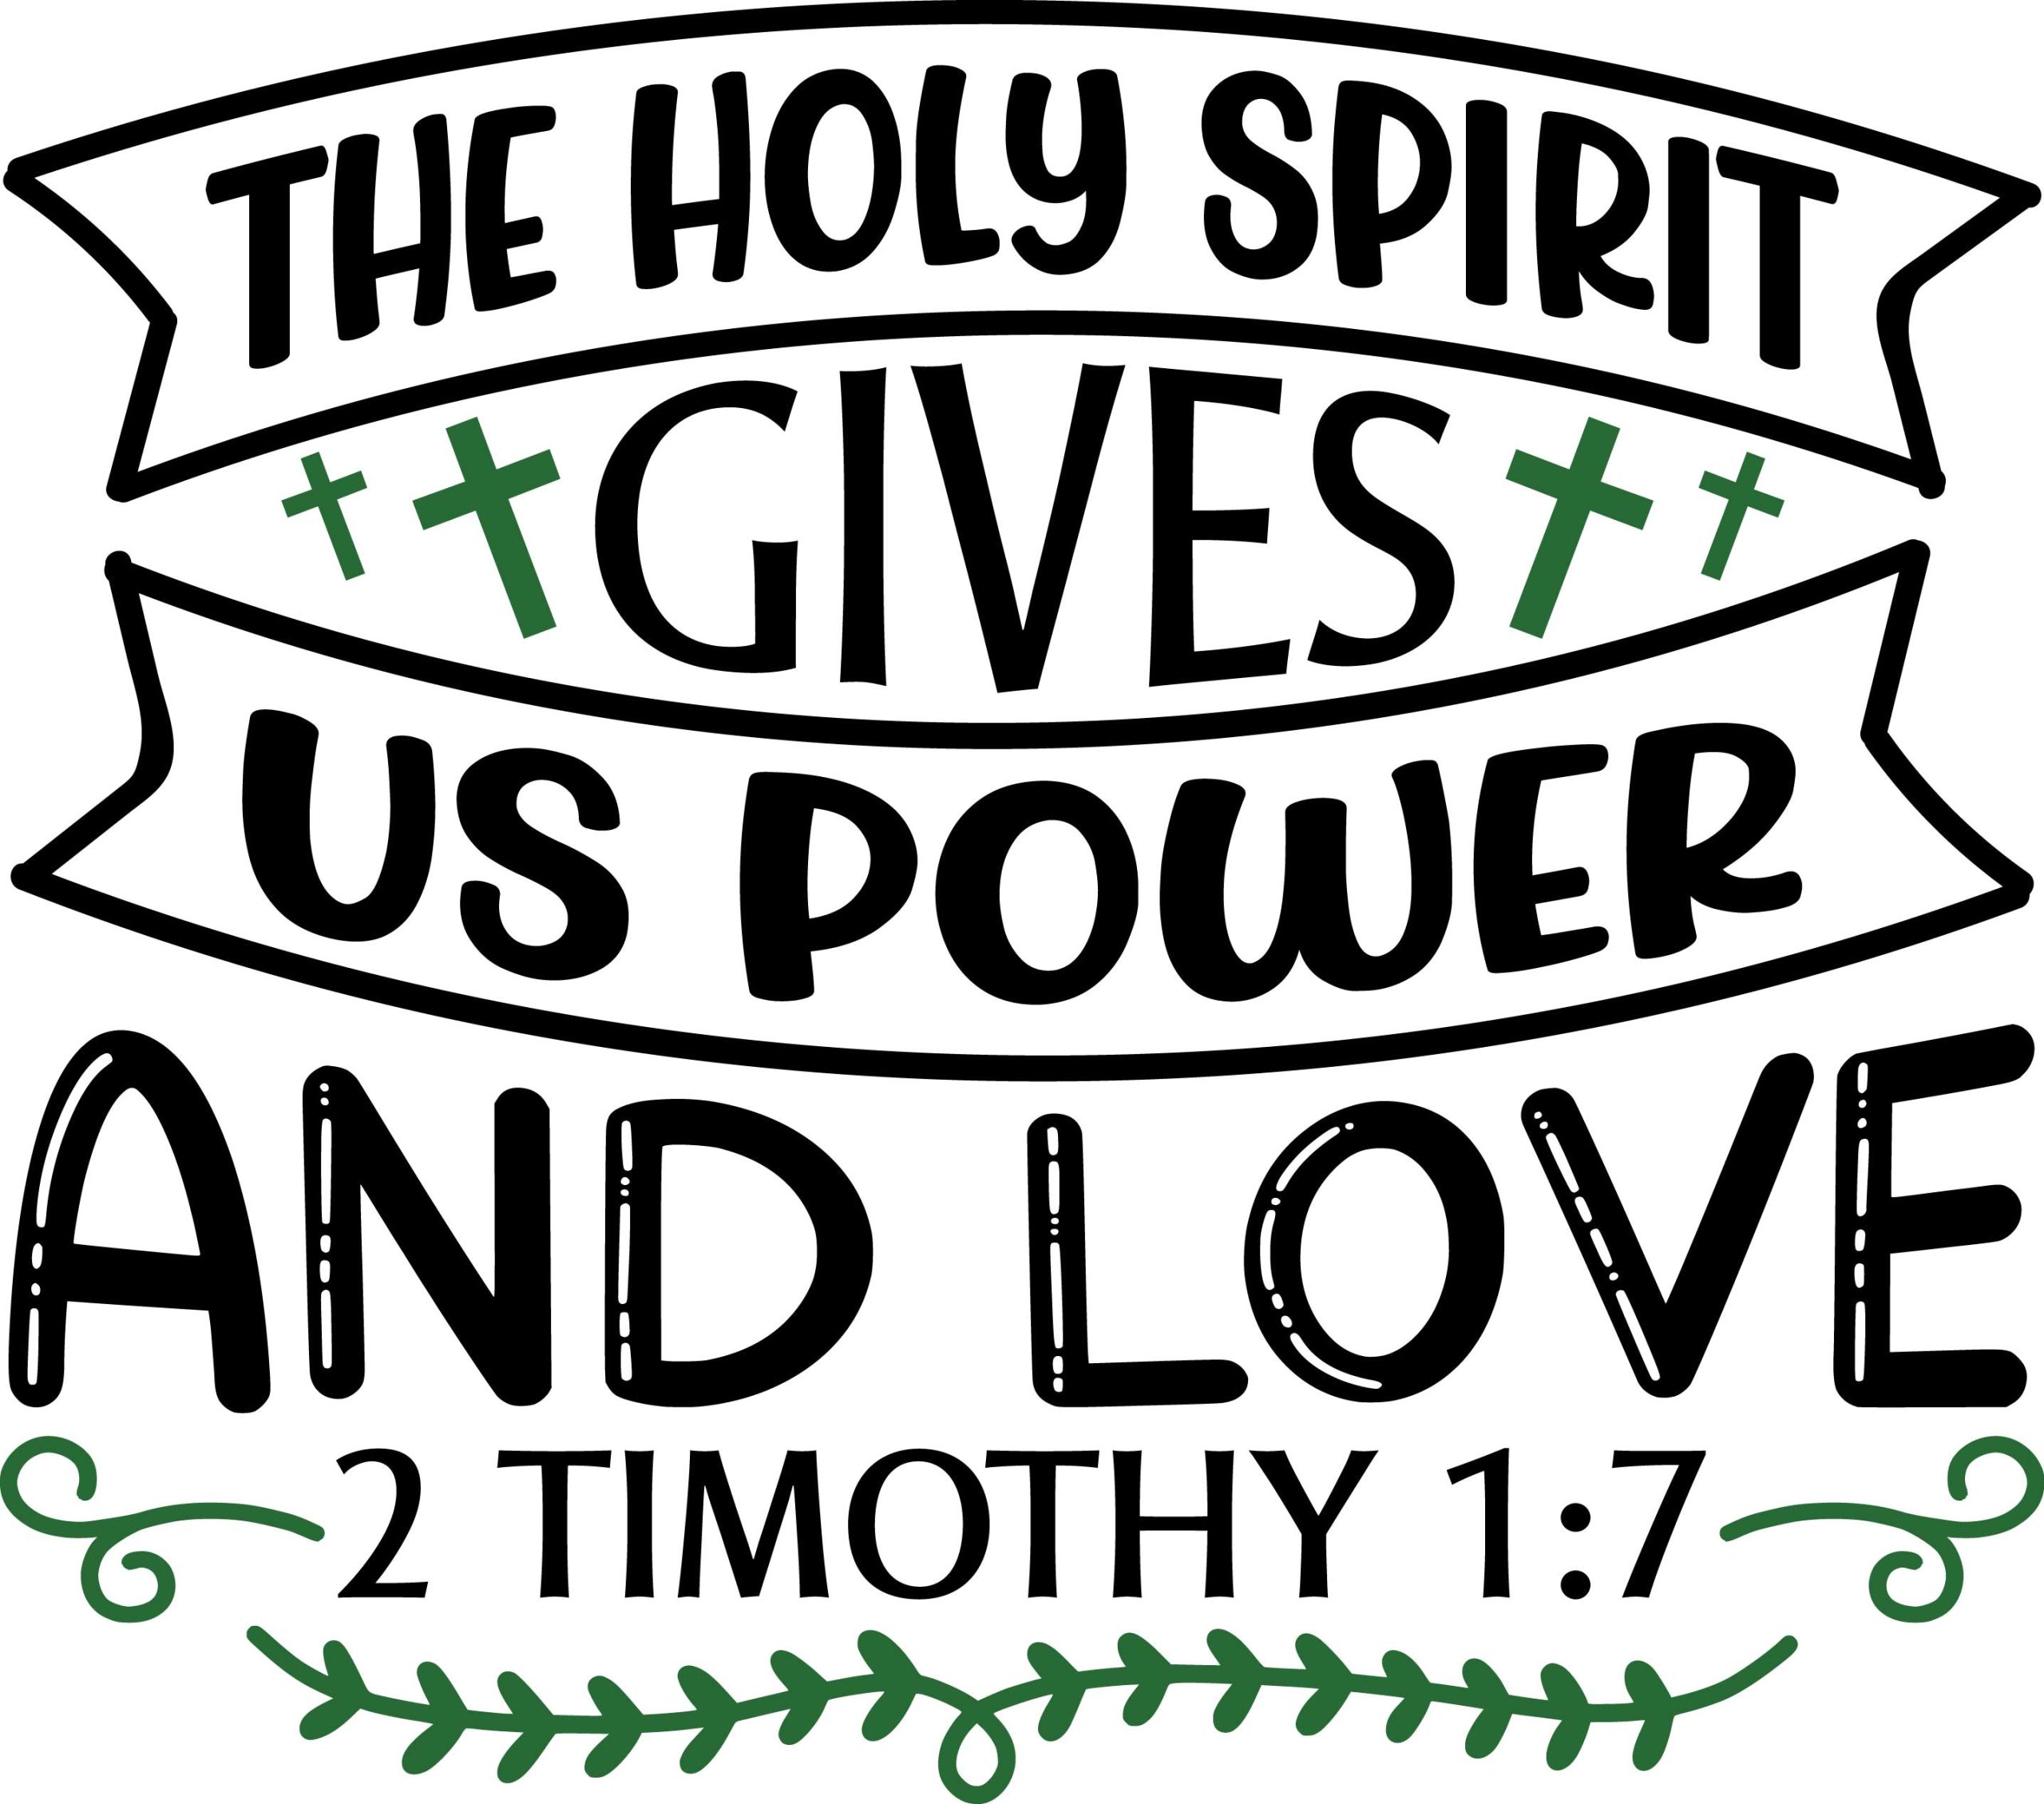 The holy spirit gives us power and love 2 Timothy 1;7, bible verses, scripture verses, svg files, passages, sayings, cricut designs, silhouette, embroidery, bundle, free cut files, design space, vector